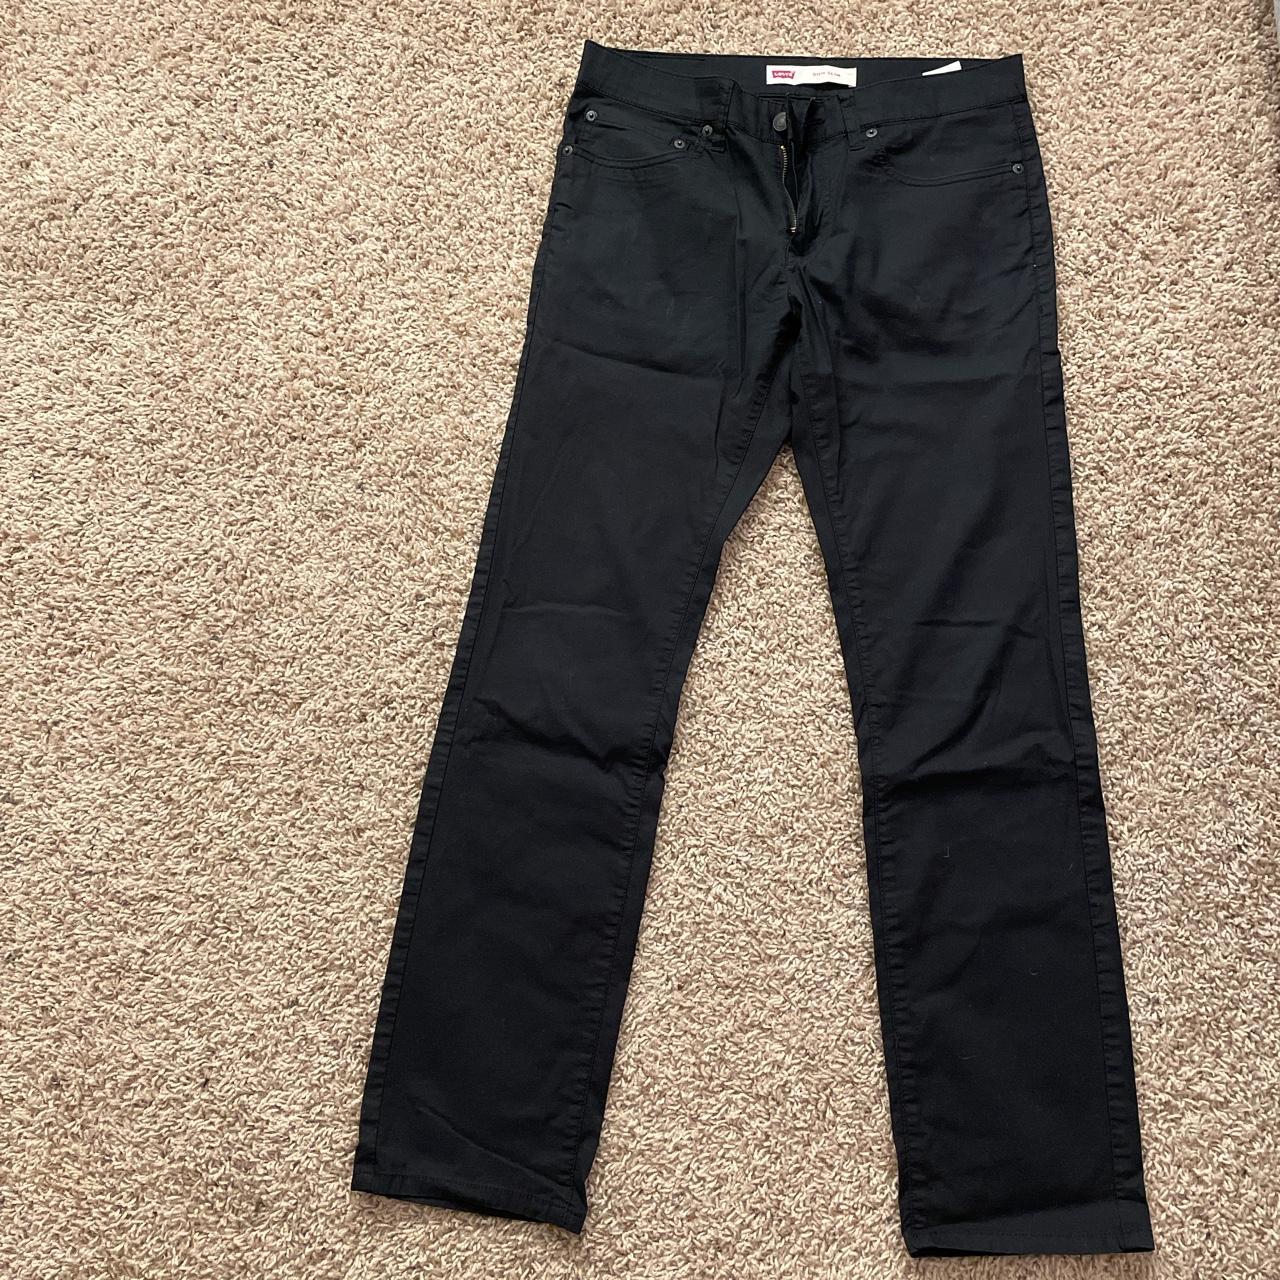 Levi Black pants in great condition no damages at... - Depop